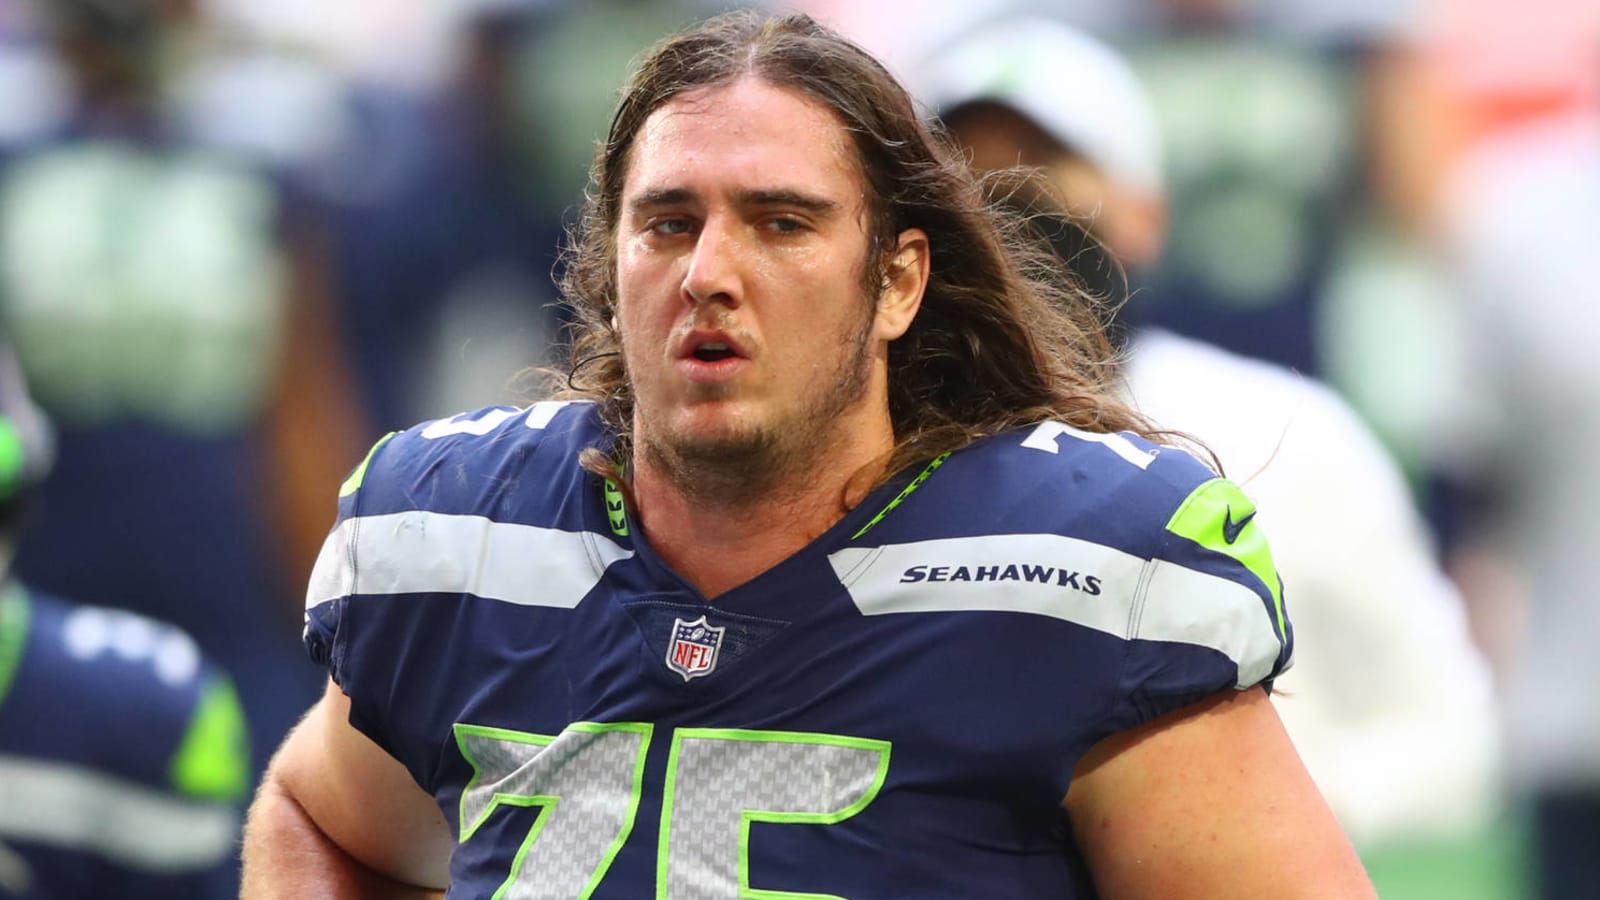 Seahawks release Chad Wheeler amid domestic violence allegations